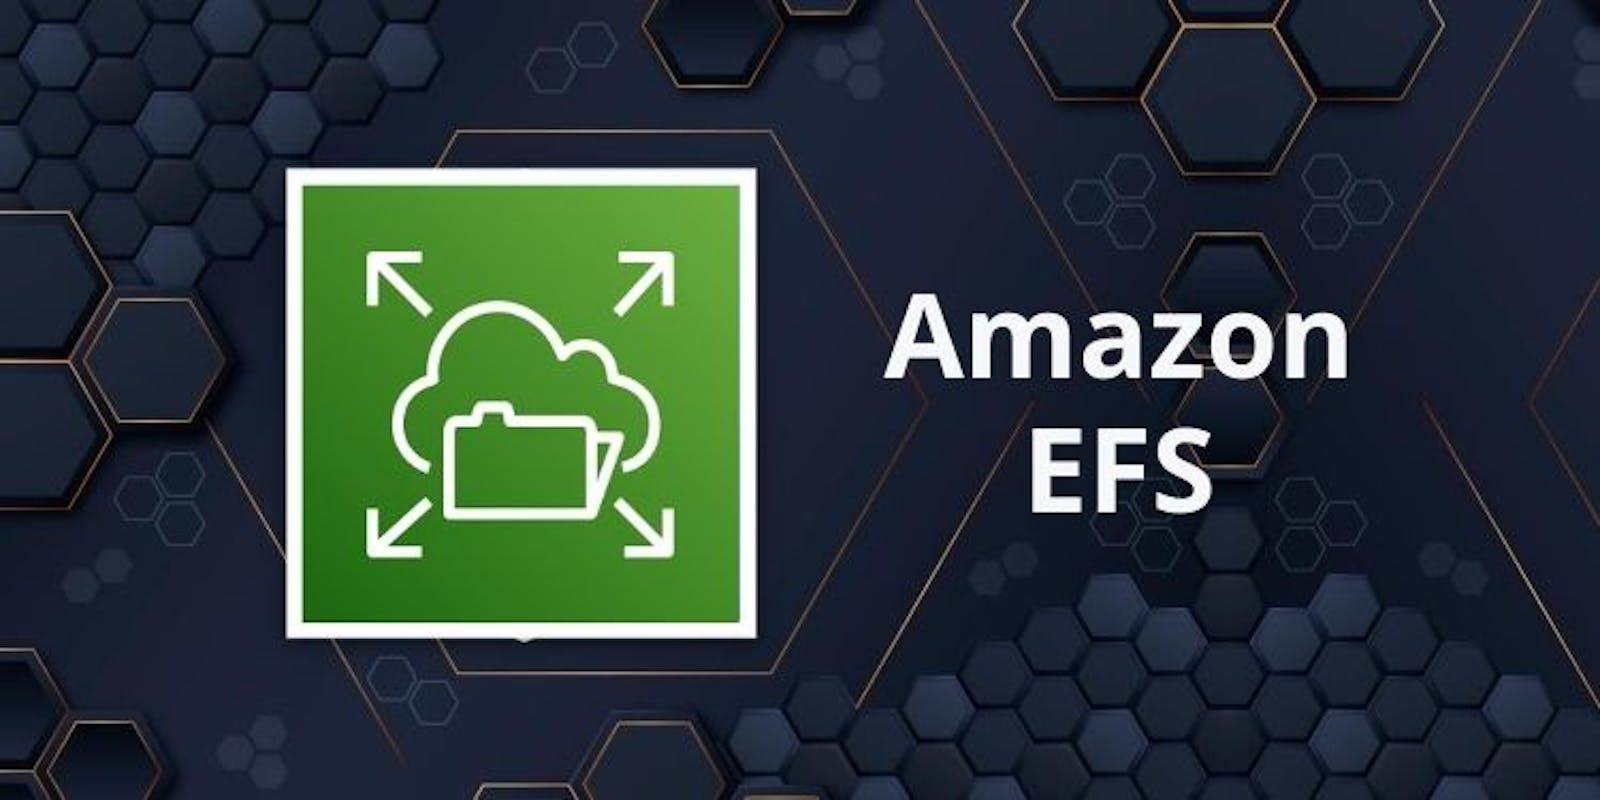 "AWS EFS: The Symphony of Elastic File Storage in the Cloud"